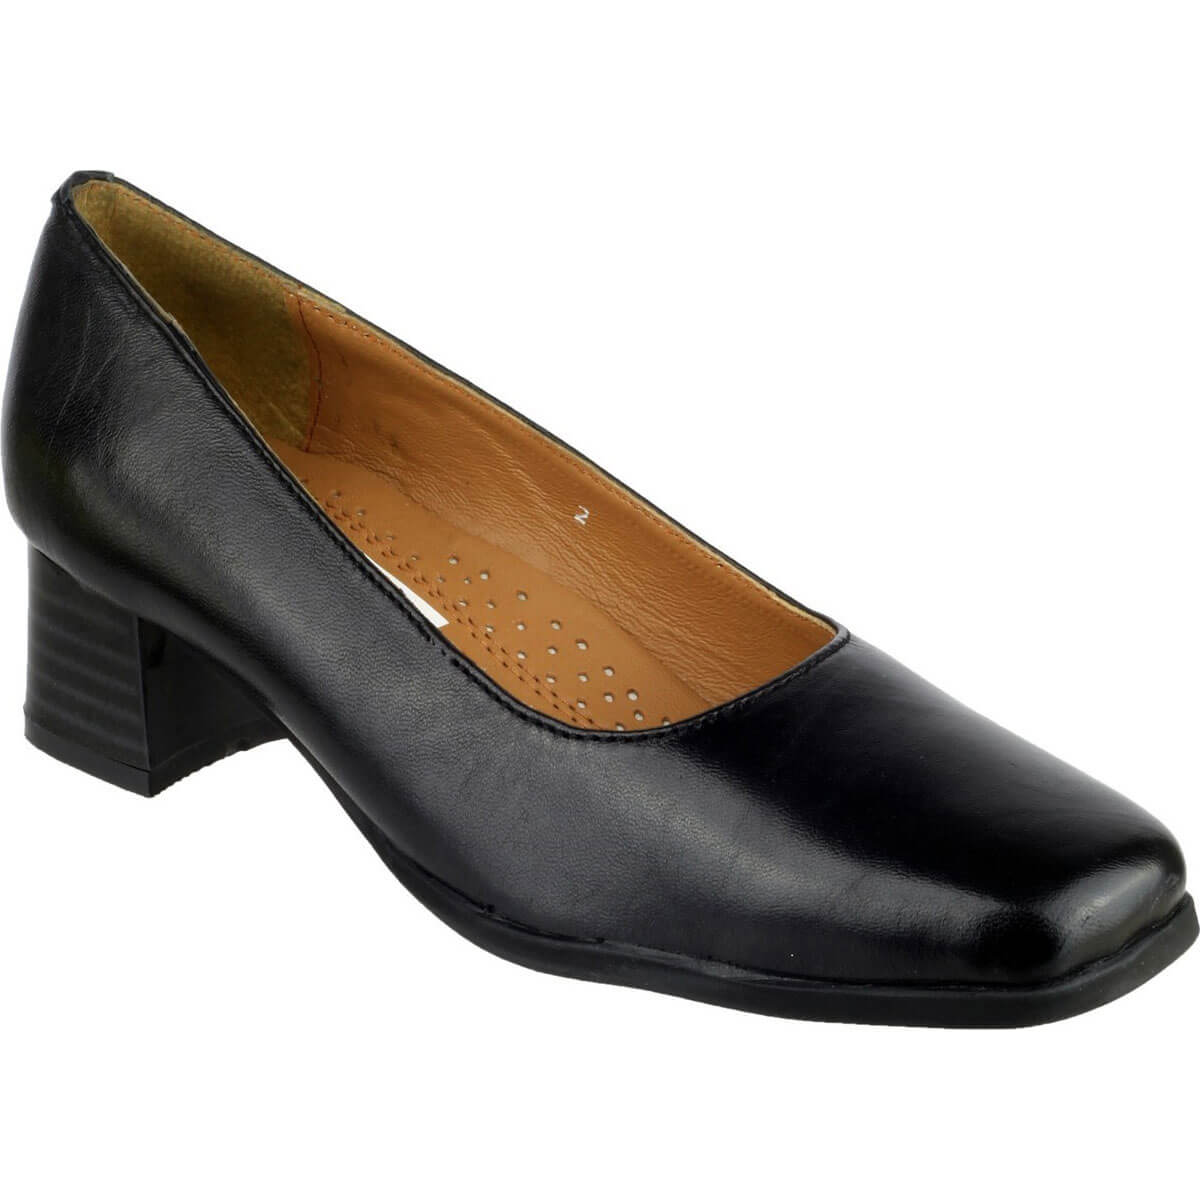 Image of Amblers Walford Ladies Shoes Leather Court Black Size 7